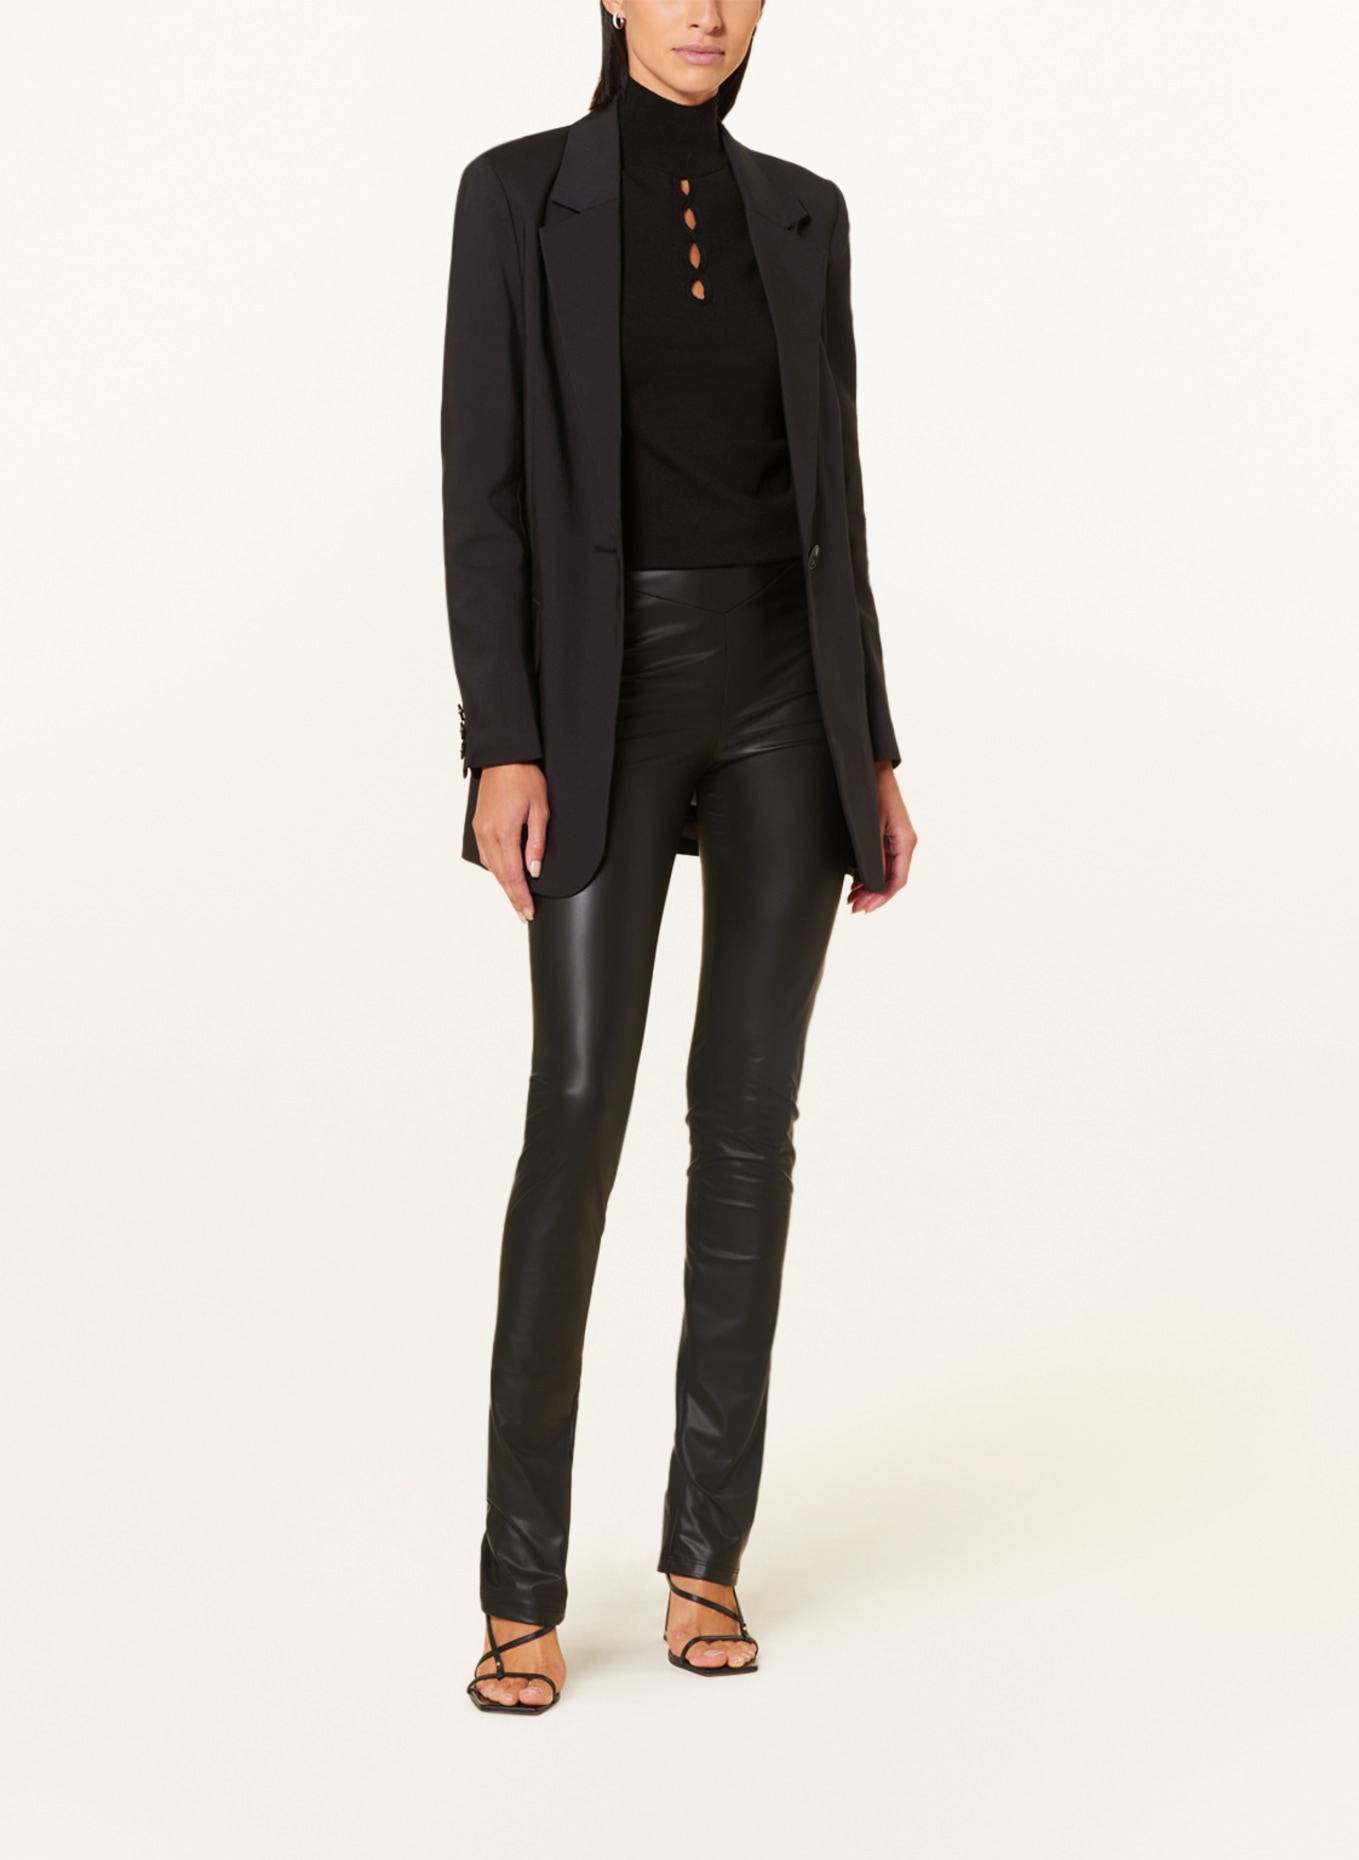 PATRIZIA PEPE Pants in leather look, Color: BLACK (Image 2)